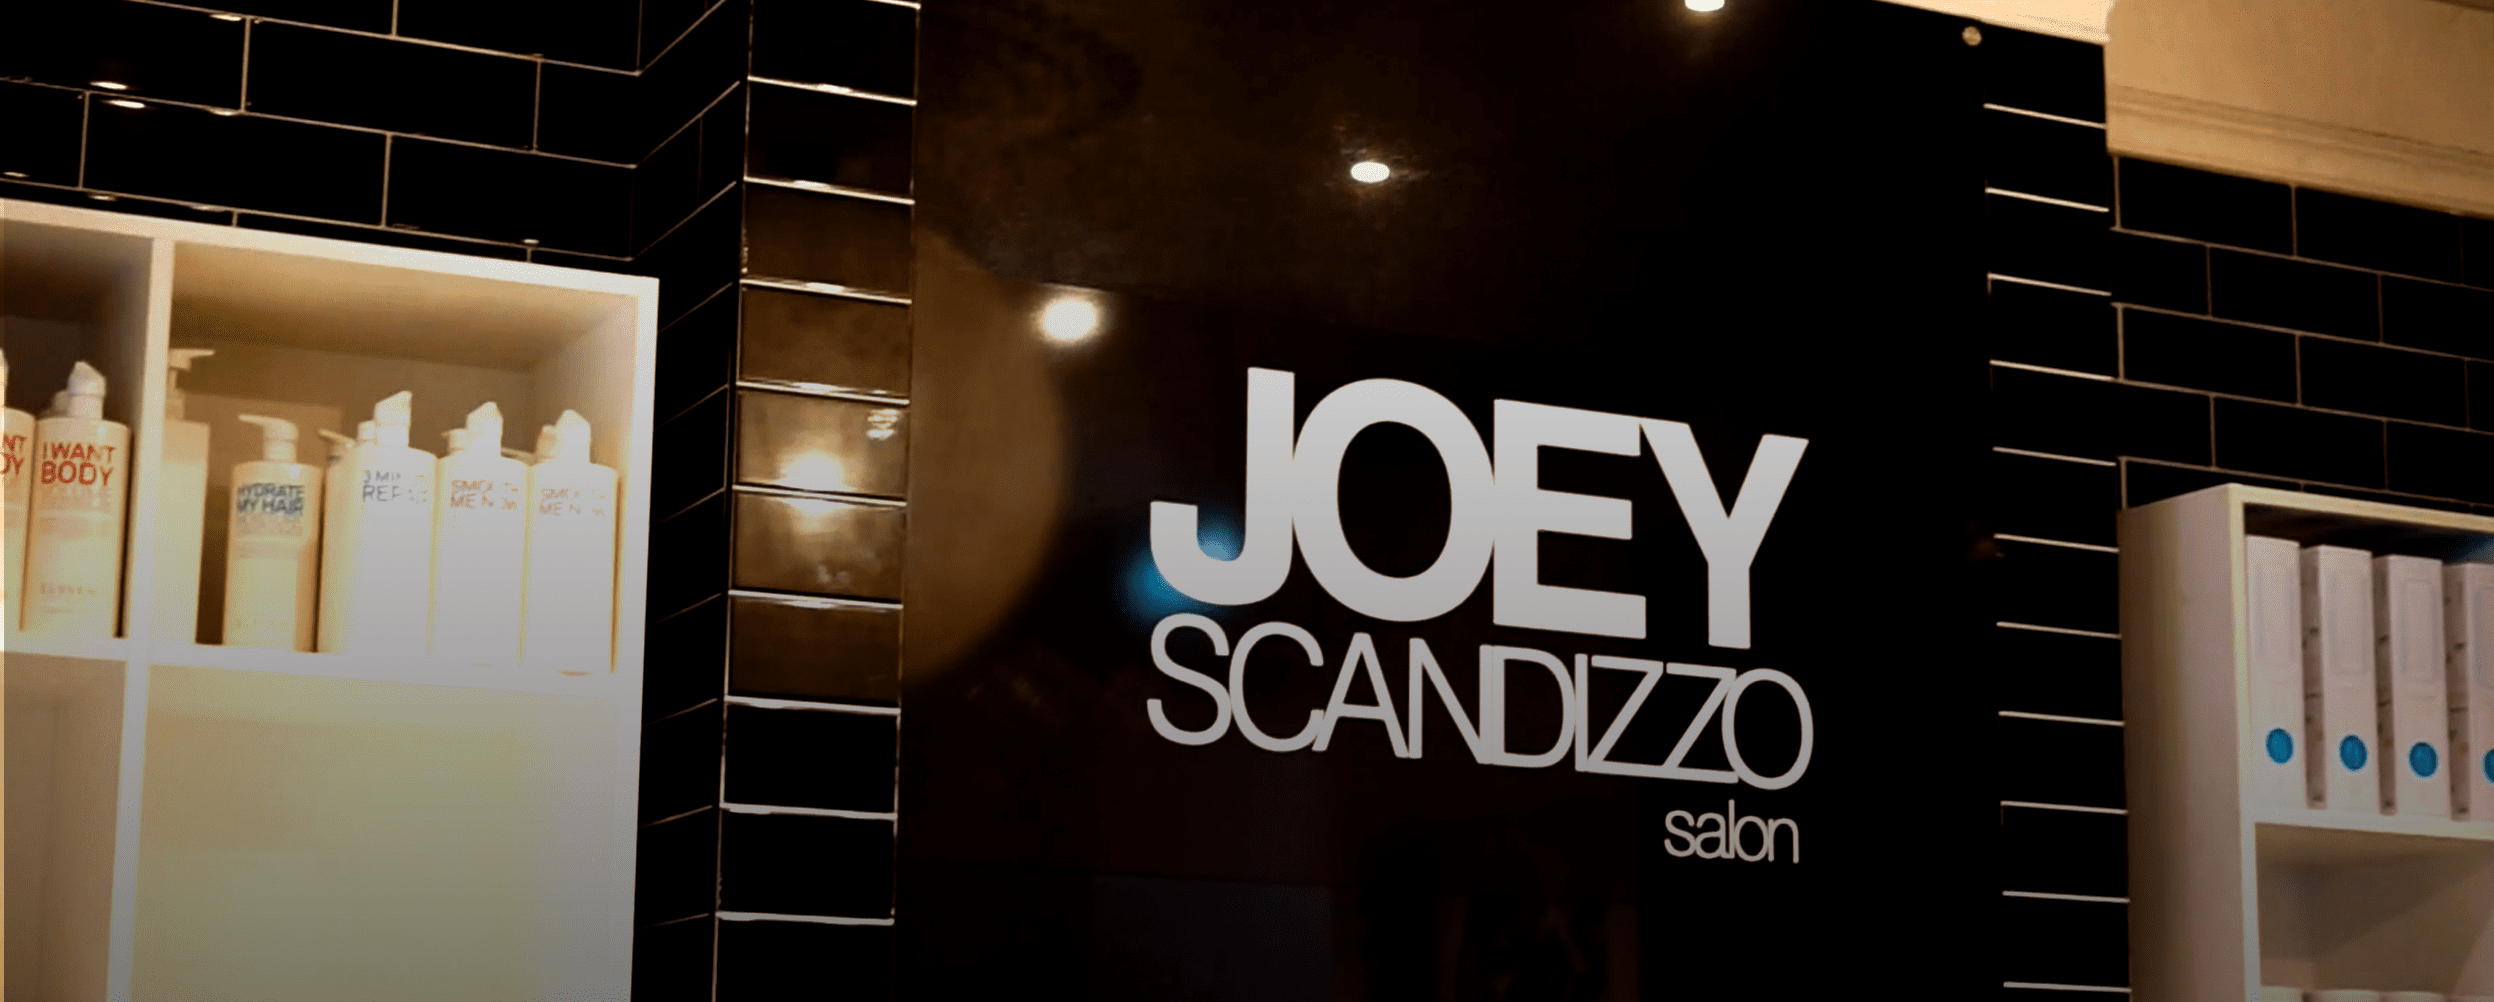 Eco-Friendly Showerheads Fully Endorsed By Award Winning Hairdresser And Salon Owner, Joey Scandizzo